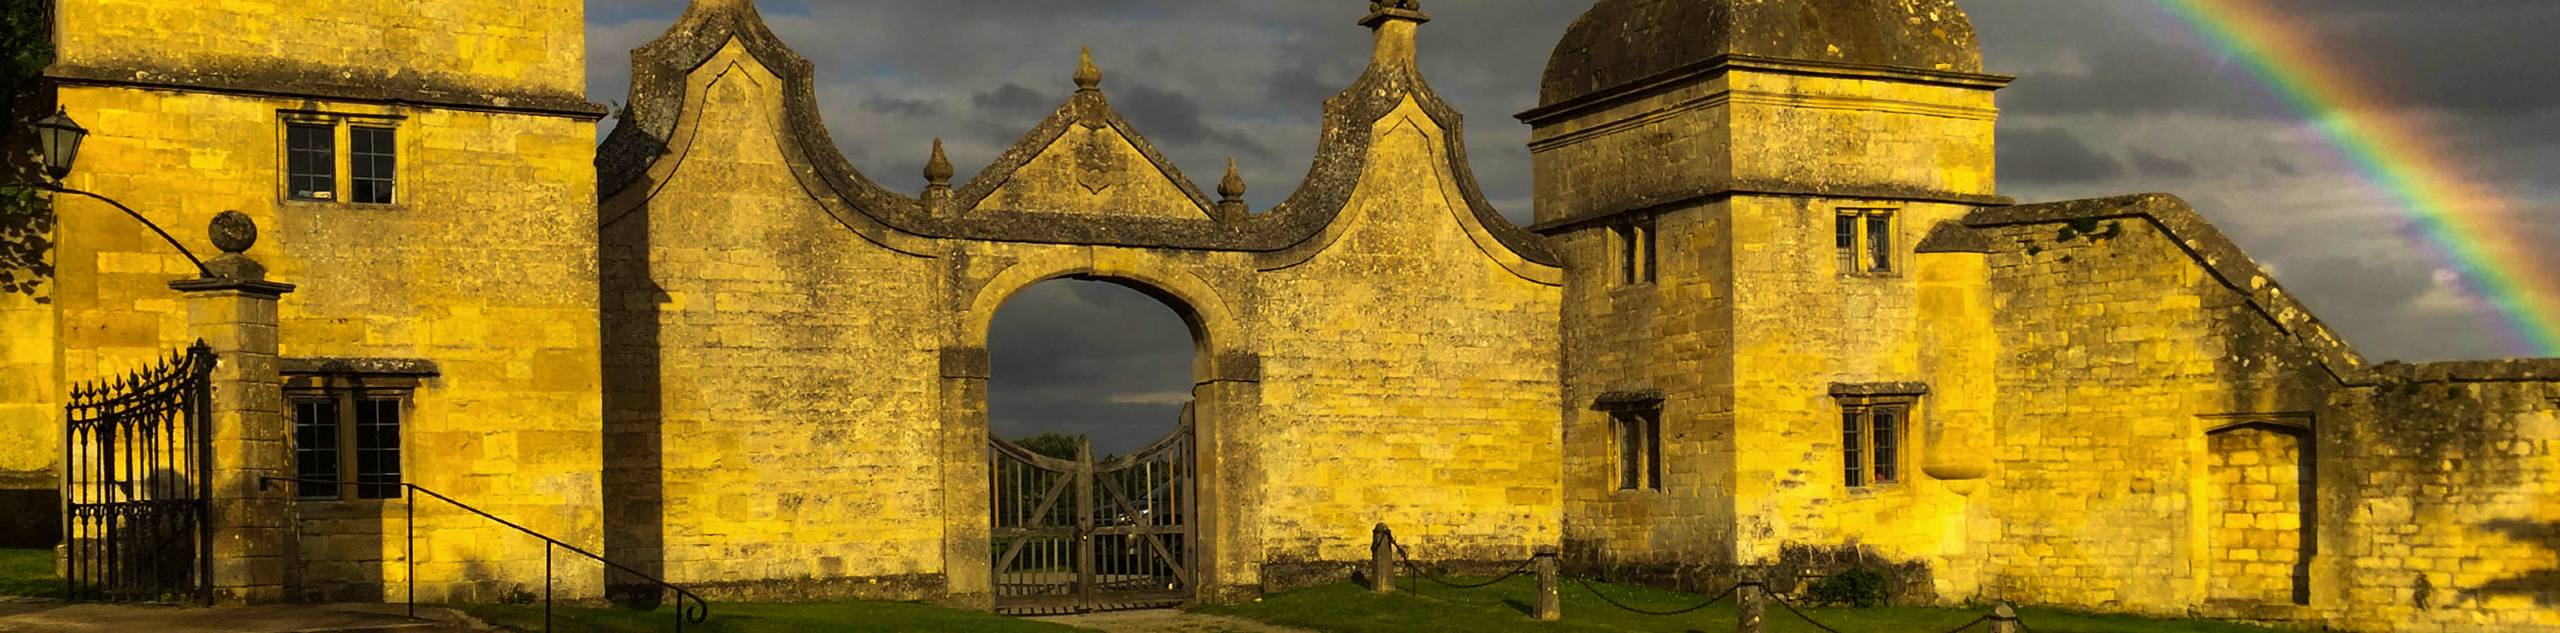 Cotswold Way - Stanton to Chipping Campden Walk